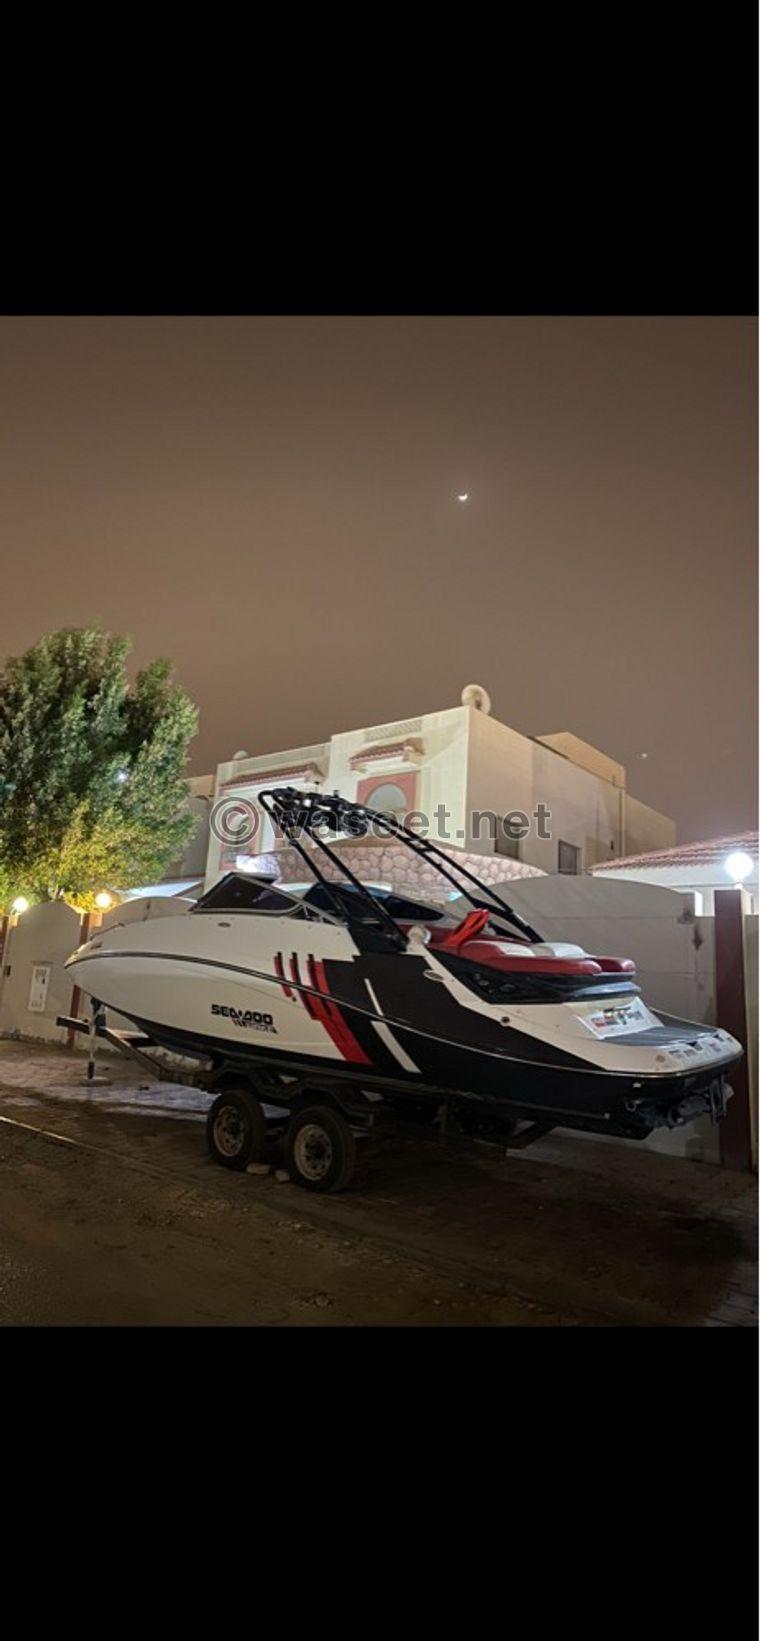 For sale Jetboat Sido  0